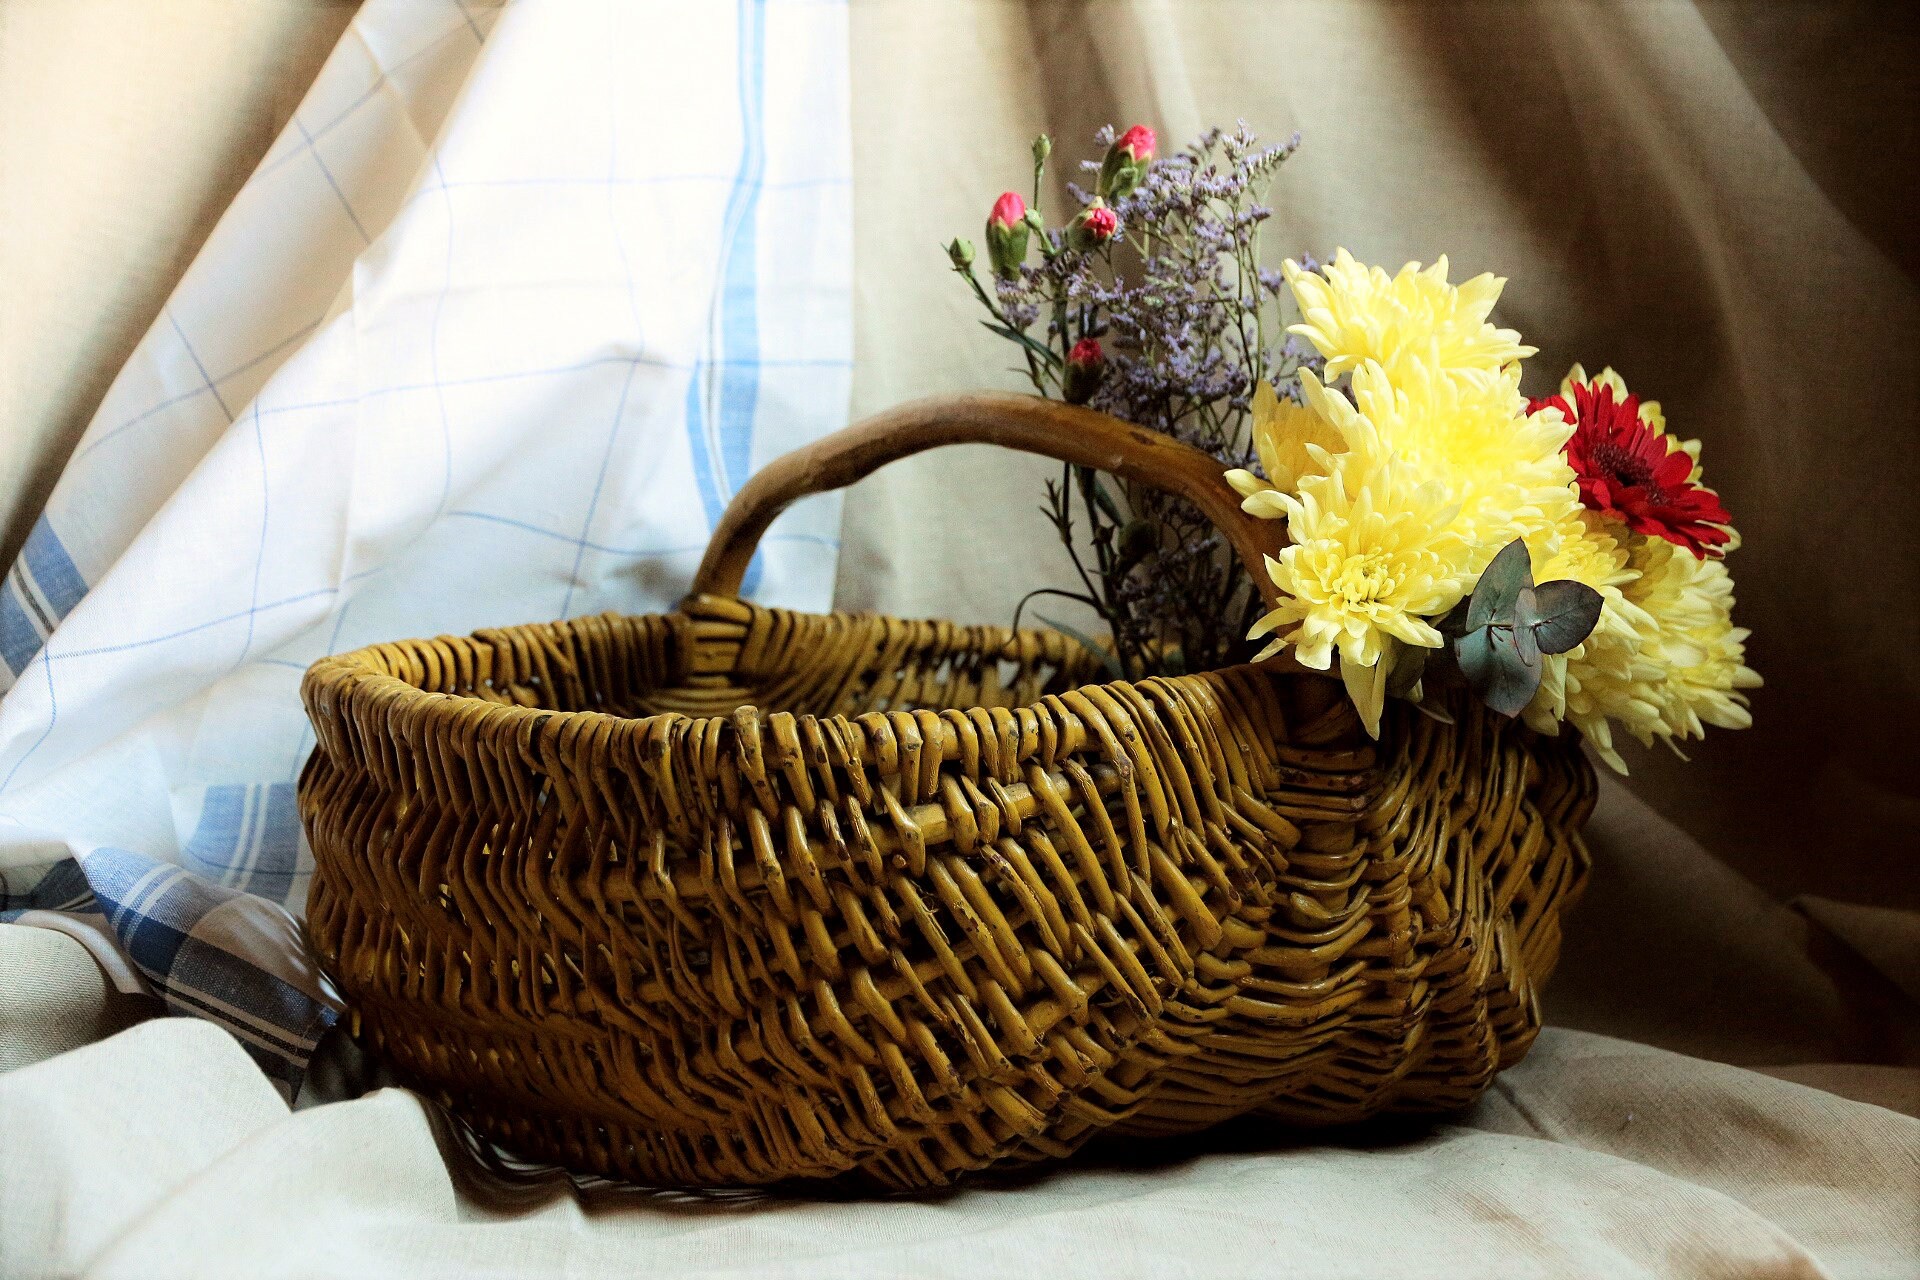 French Wooden Basket With Handle, Vintage Centerpiece Basket, Rustic Farm  Basket, Basket on the Stand, Wooden Box, 